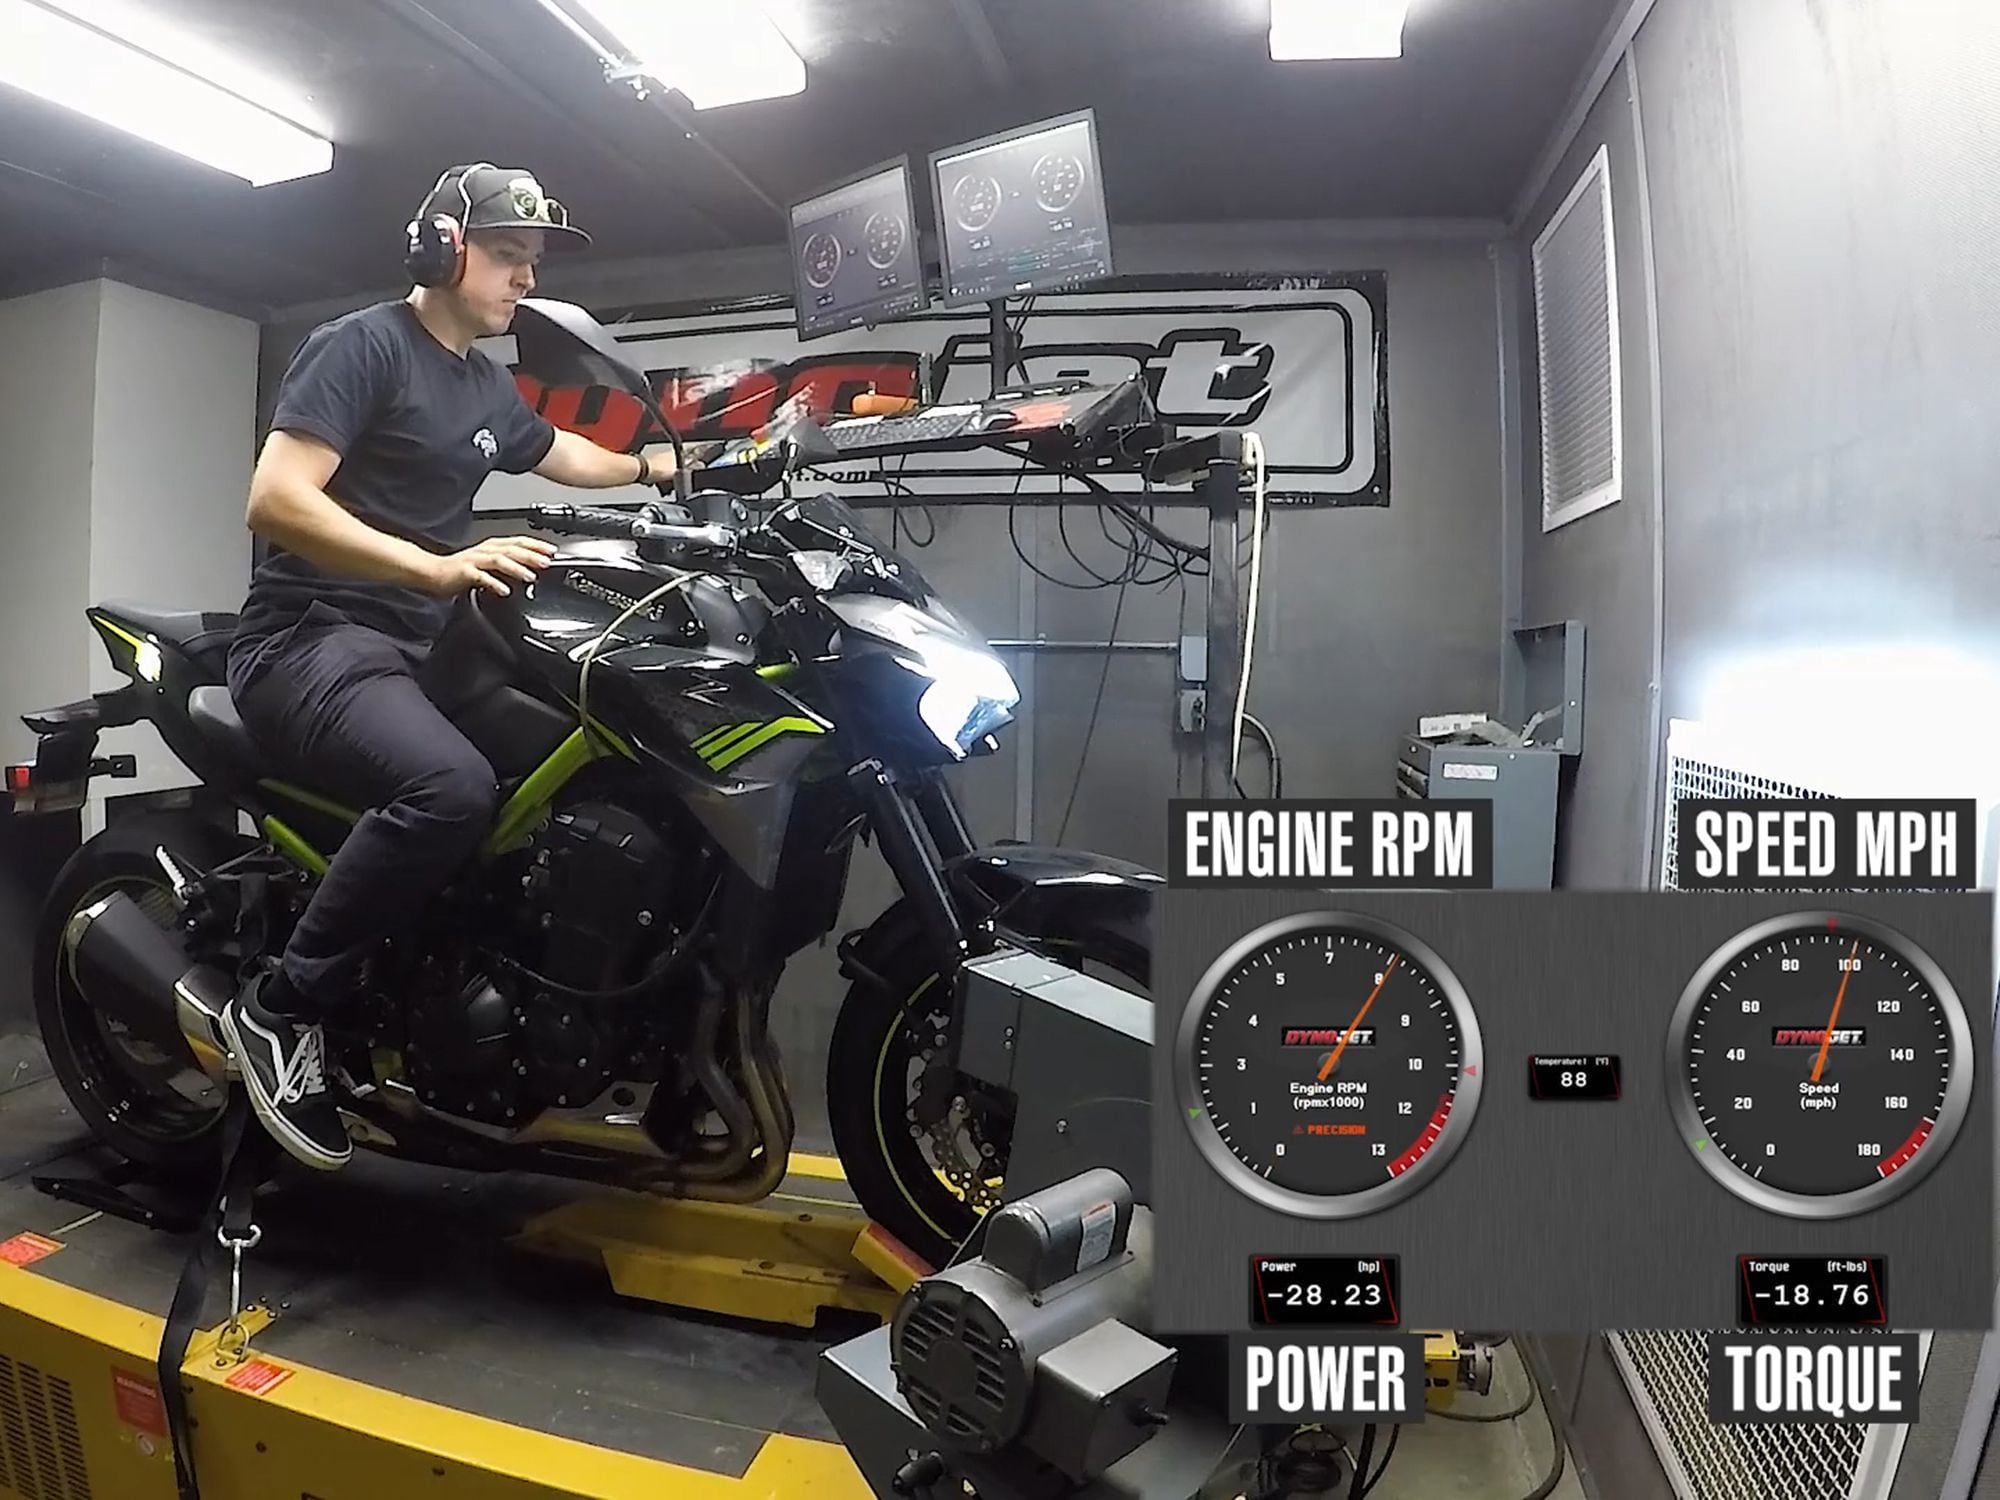 How Much Power Does The 2020 Kawasaki Z900 Make?